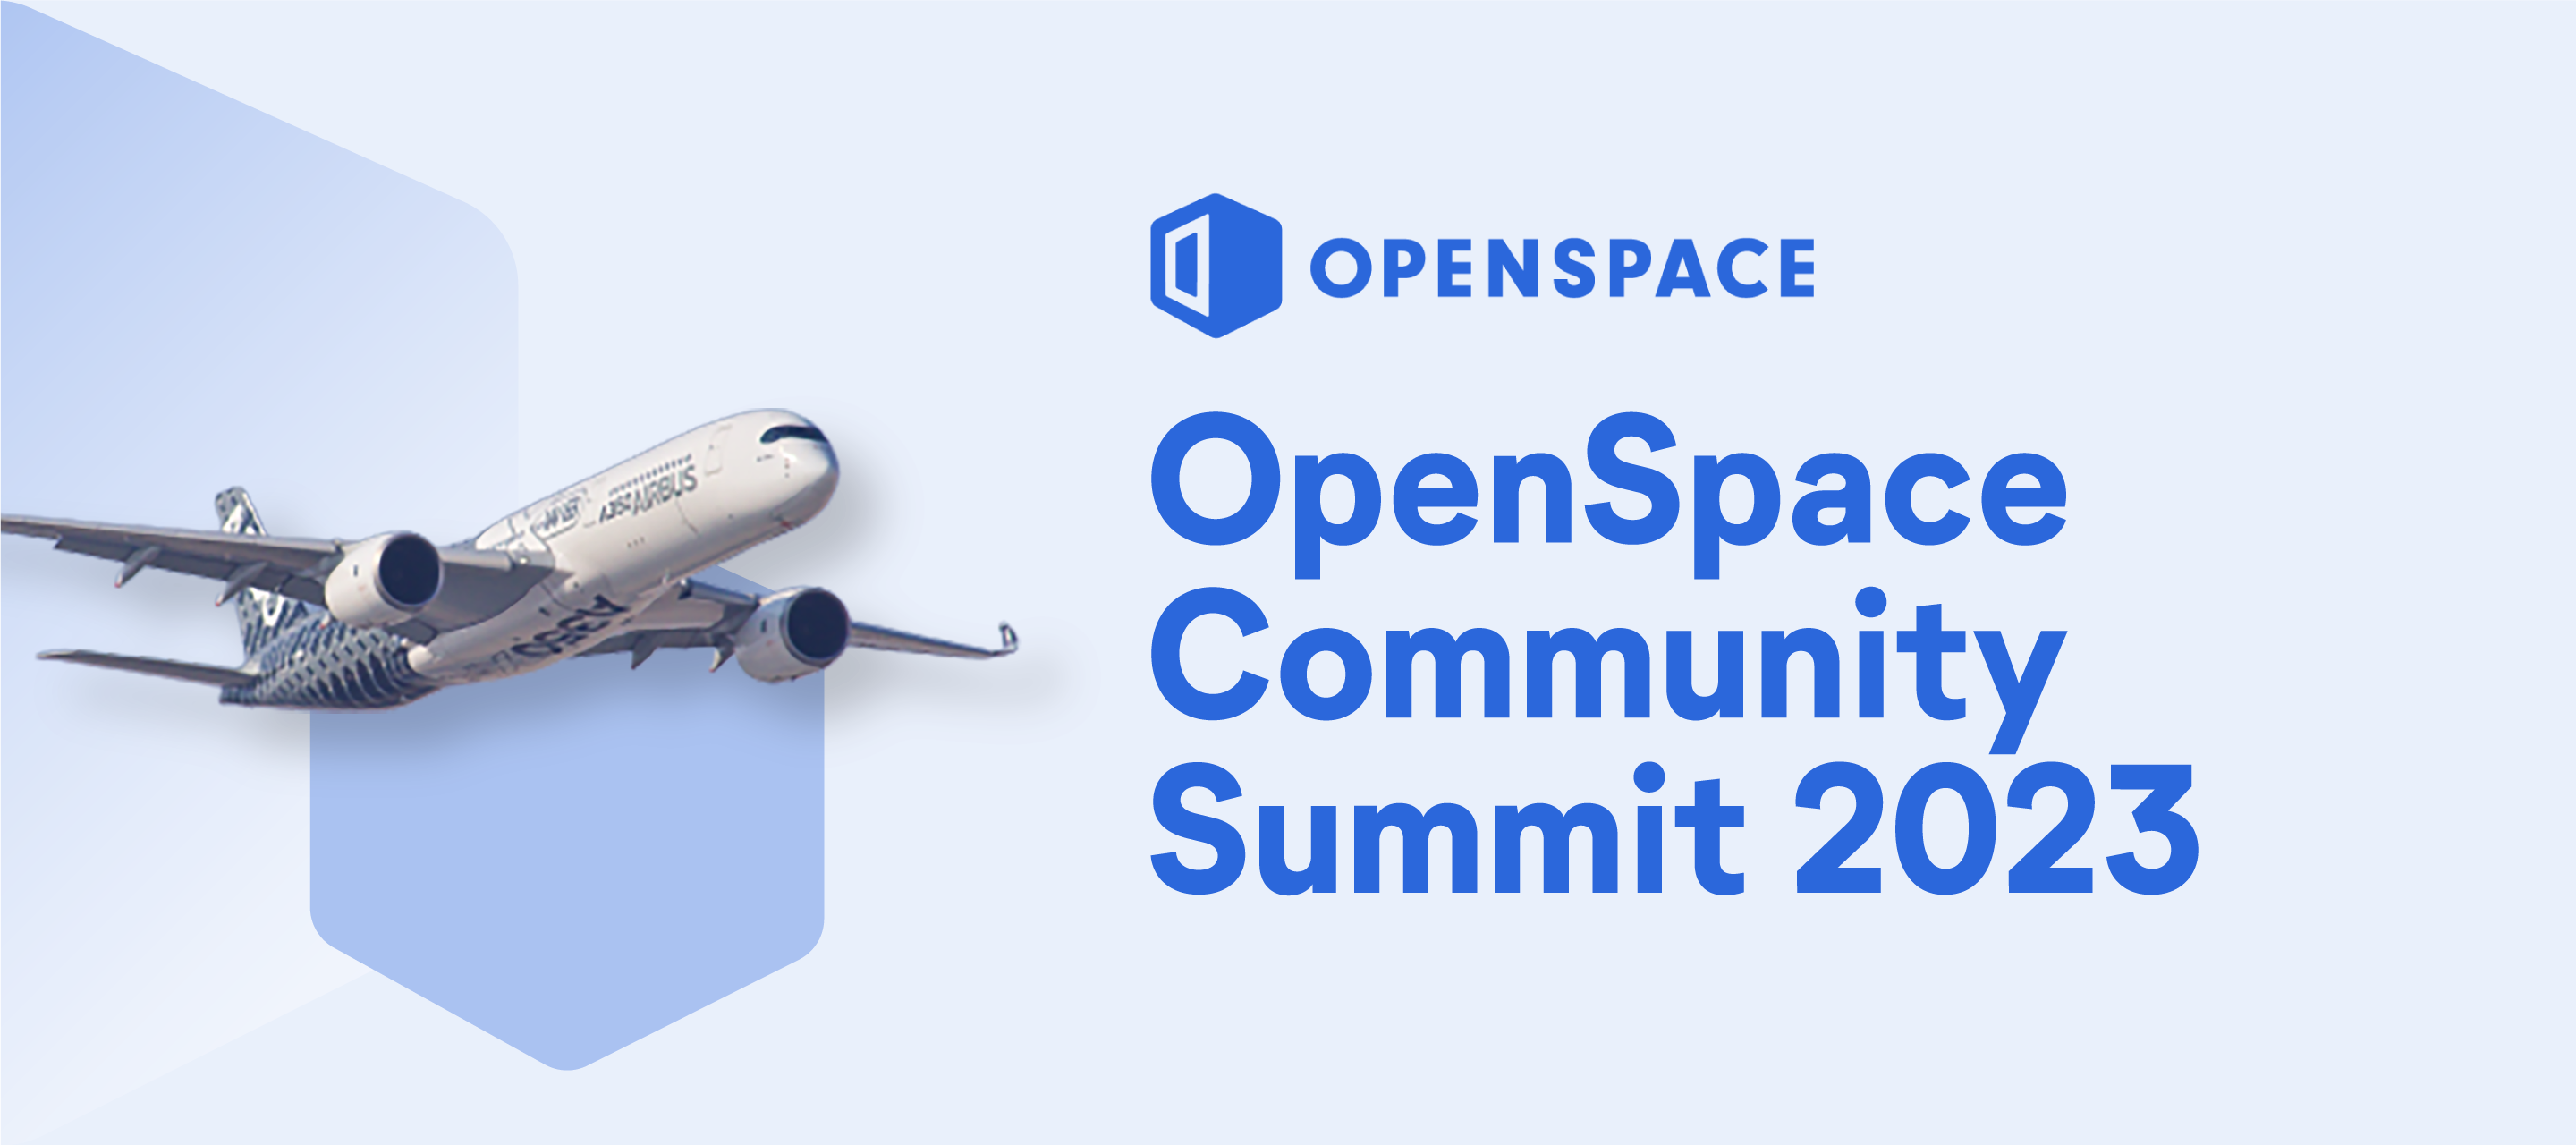 OpenSpace Community Summit Sweepstakes: Hotel & Flight Costs Covered!